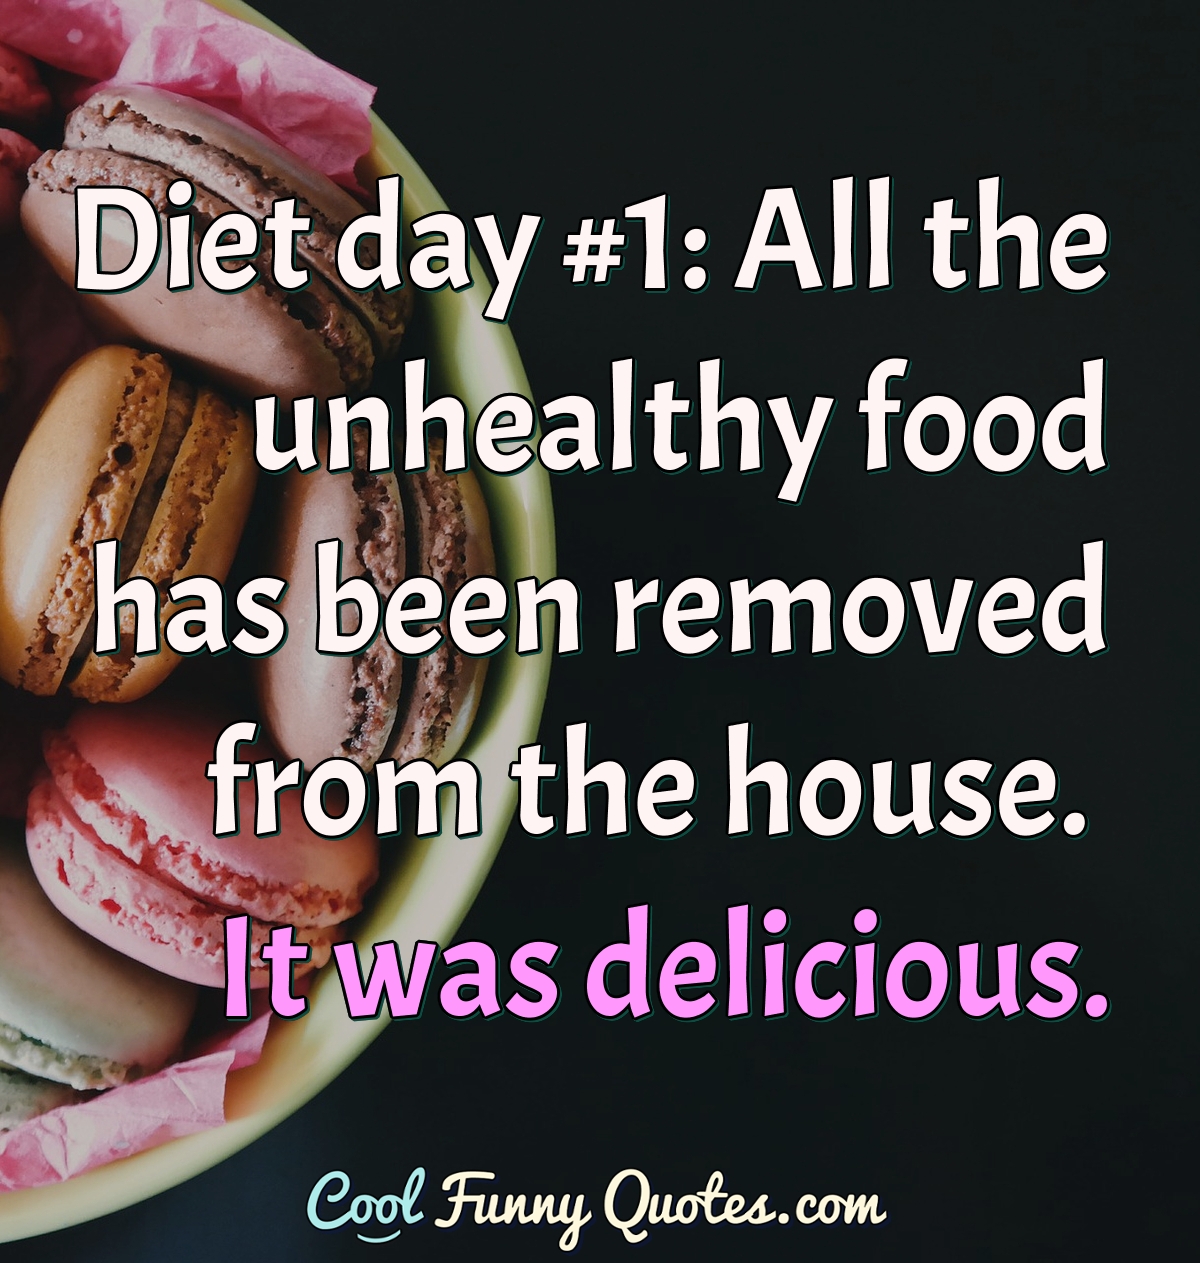 Diet day #1: All the unhealthy food has been removed from the house. It was delicious. - Anonymous